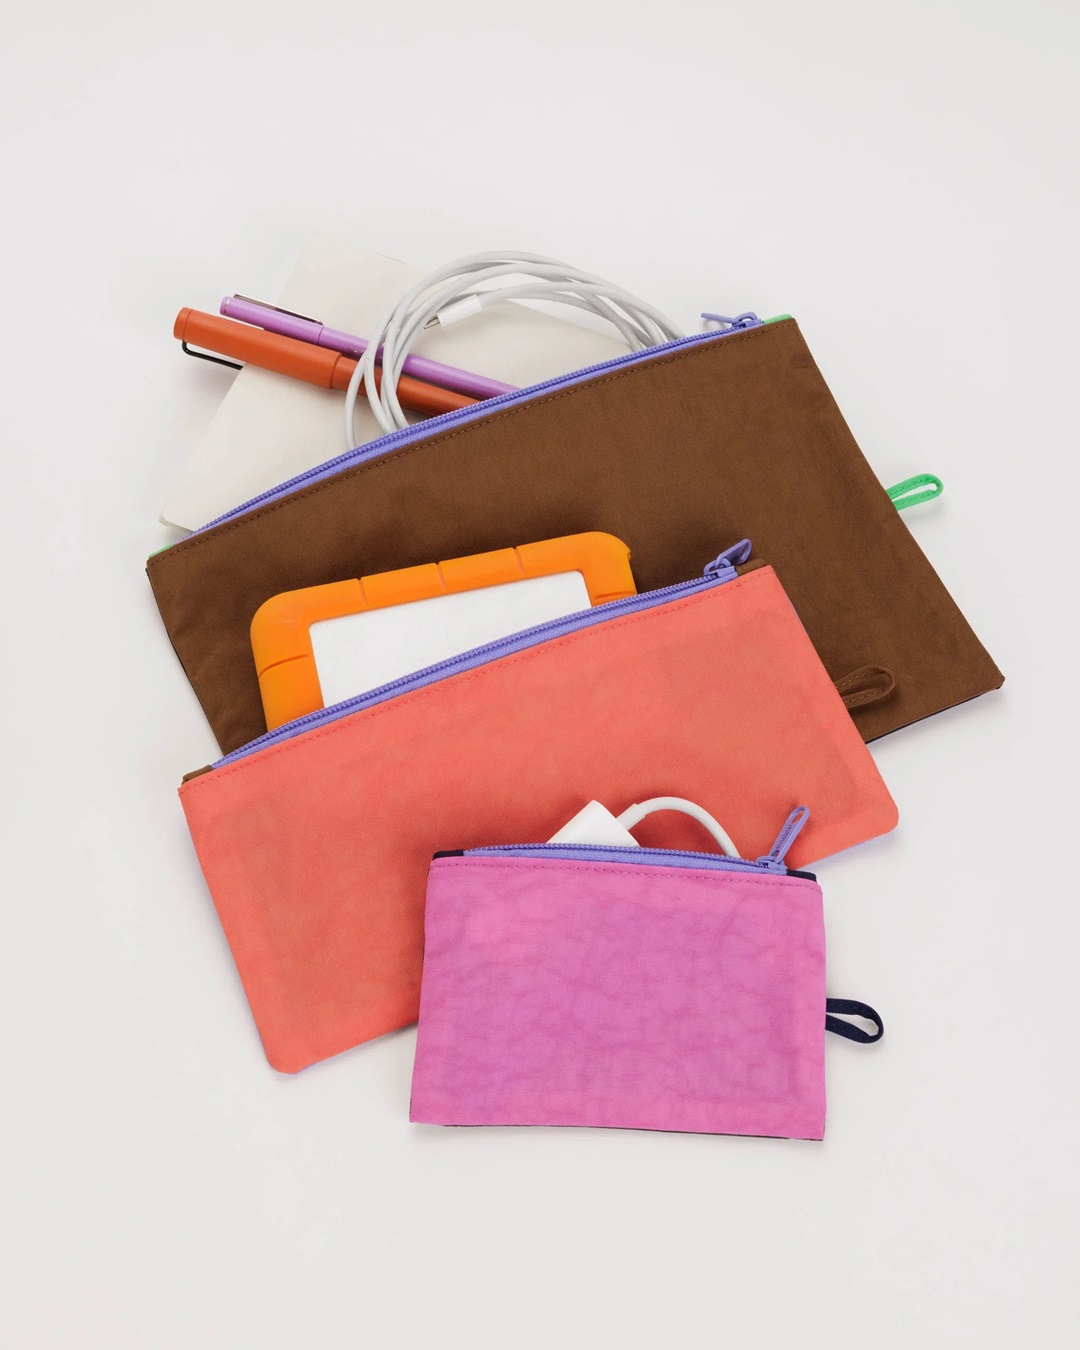 Pink orange and brown flat pouches with stationery in